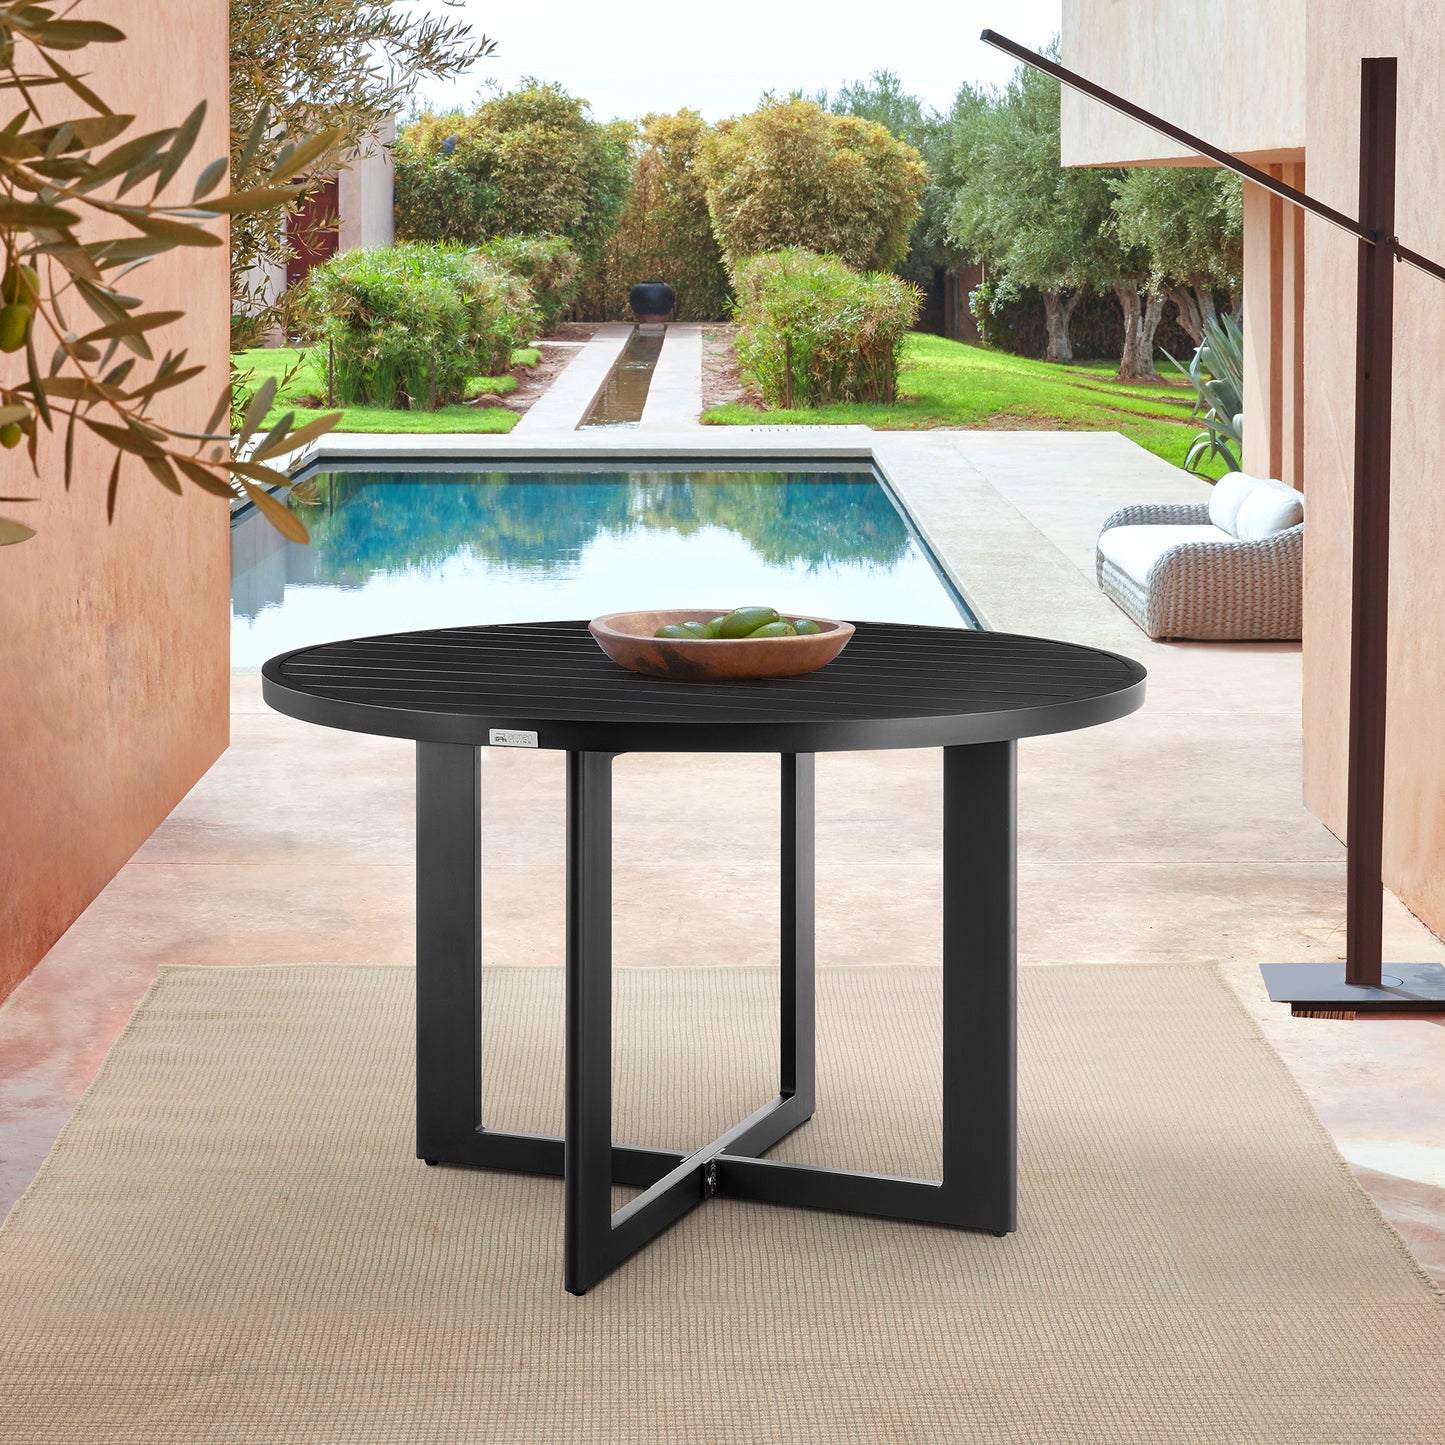 Cayman Outdoor Patio Round Dining Table in Aluminum